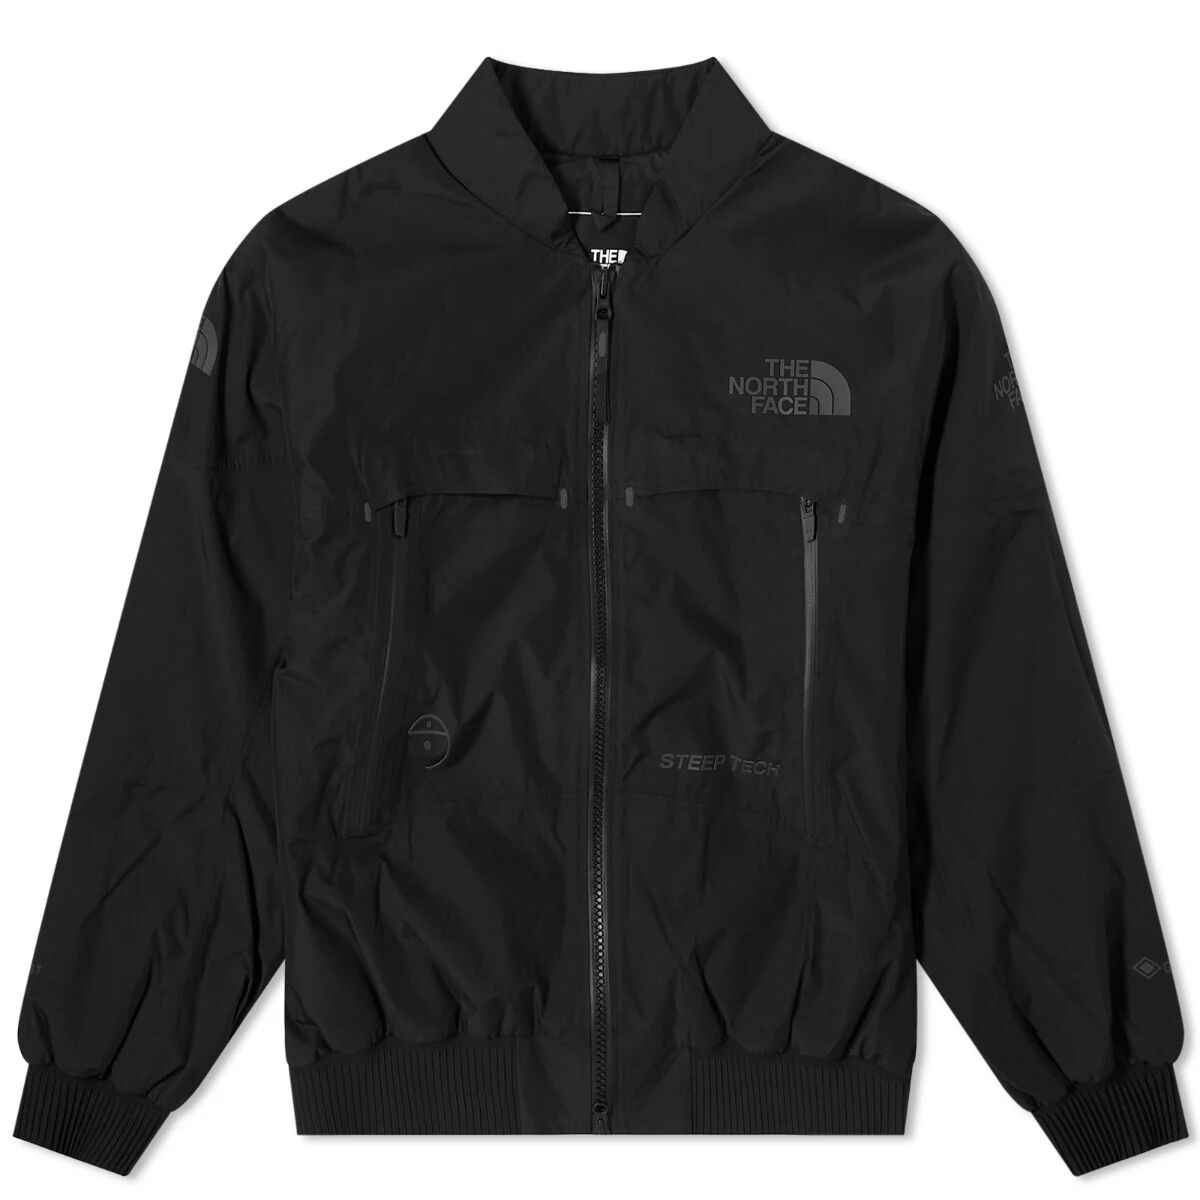 The North Face Men's Remastered Steep Tech Gore-Tex Bomber Jacket in Tnf Black, Size Small